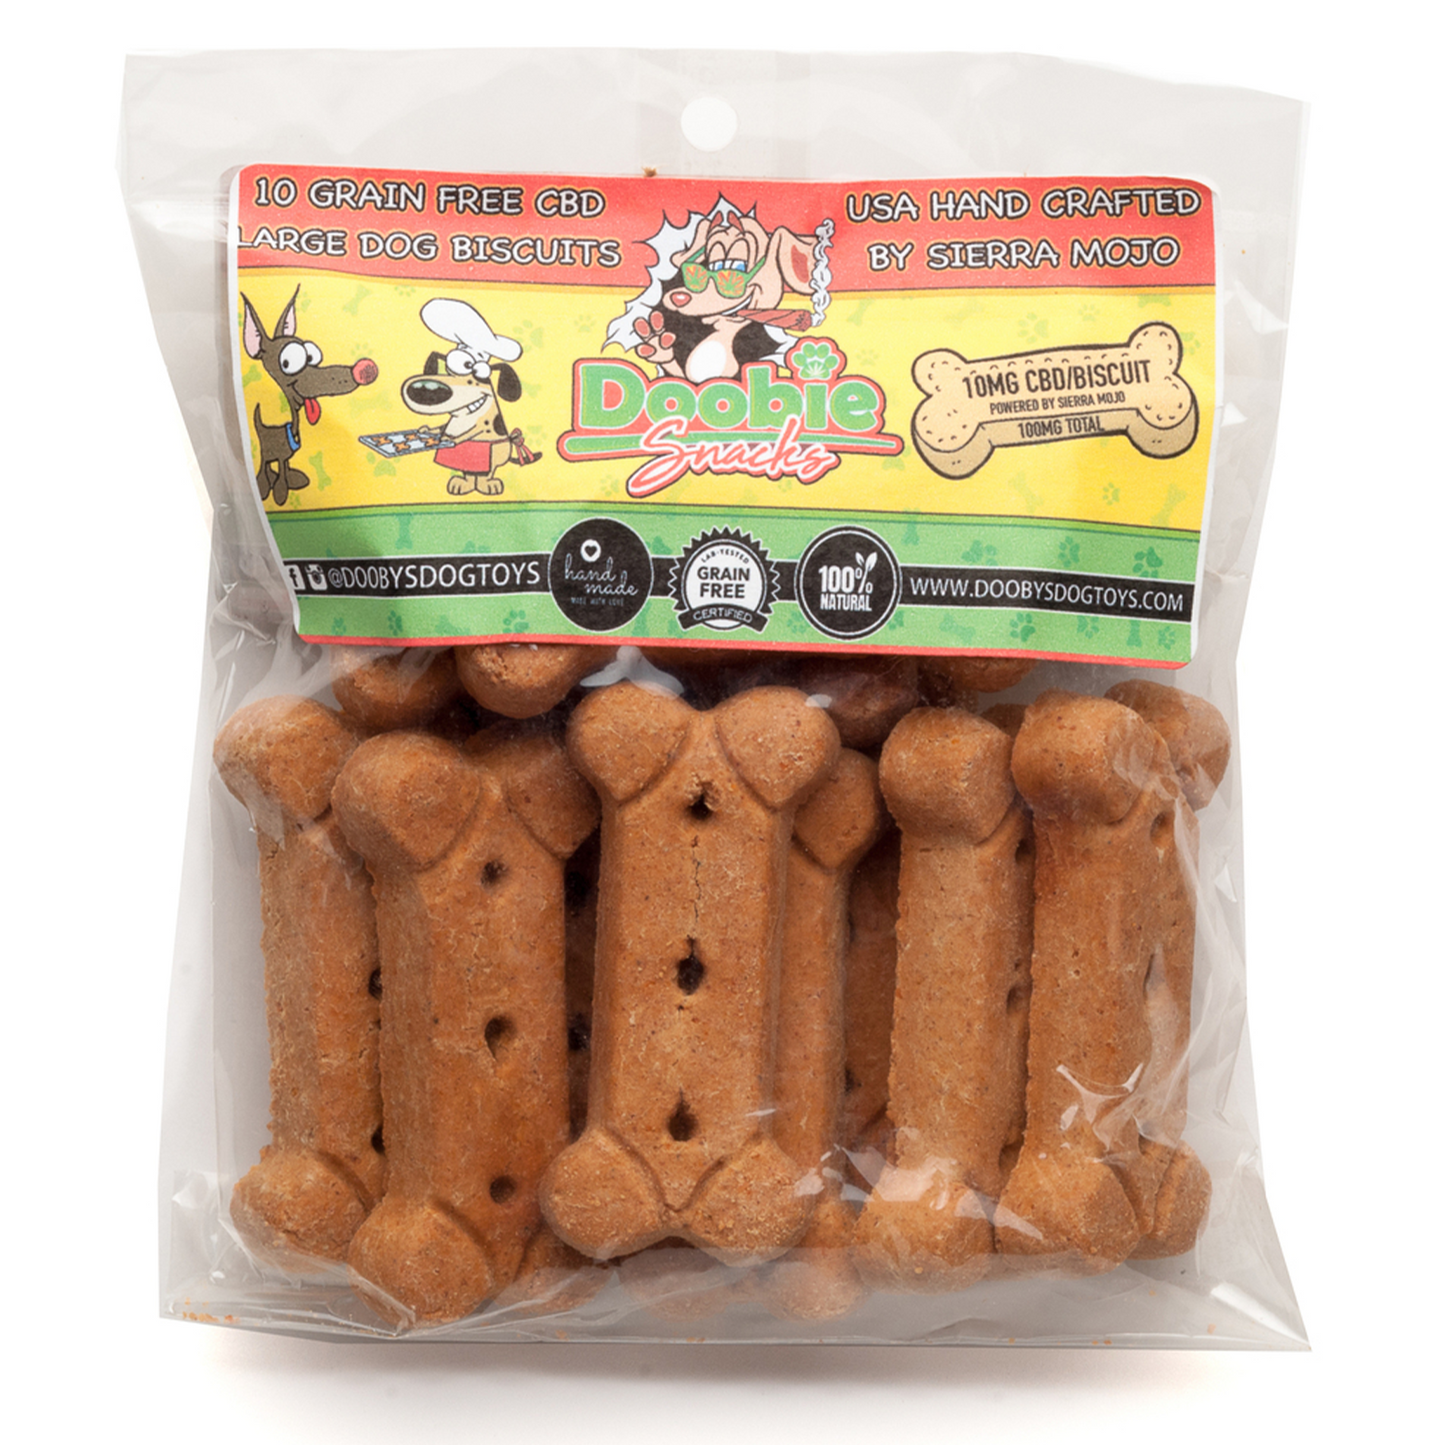 Large Biscuits 100 MG